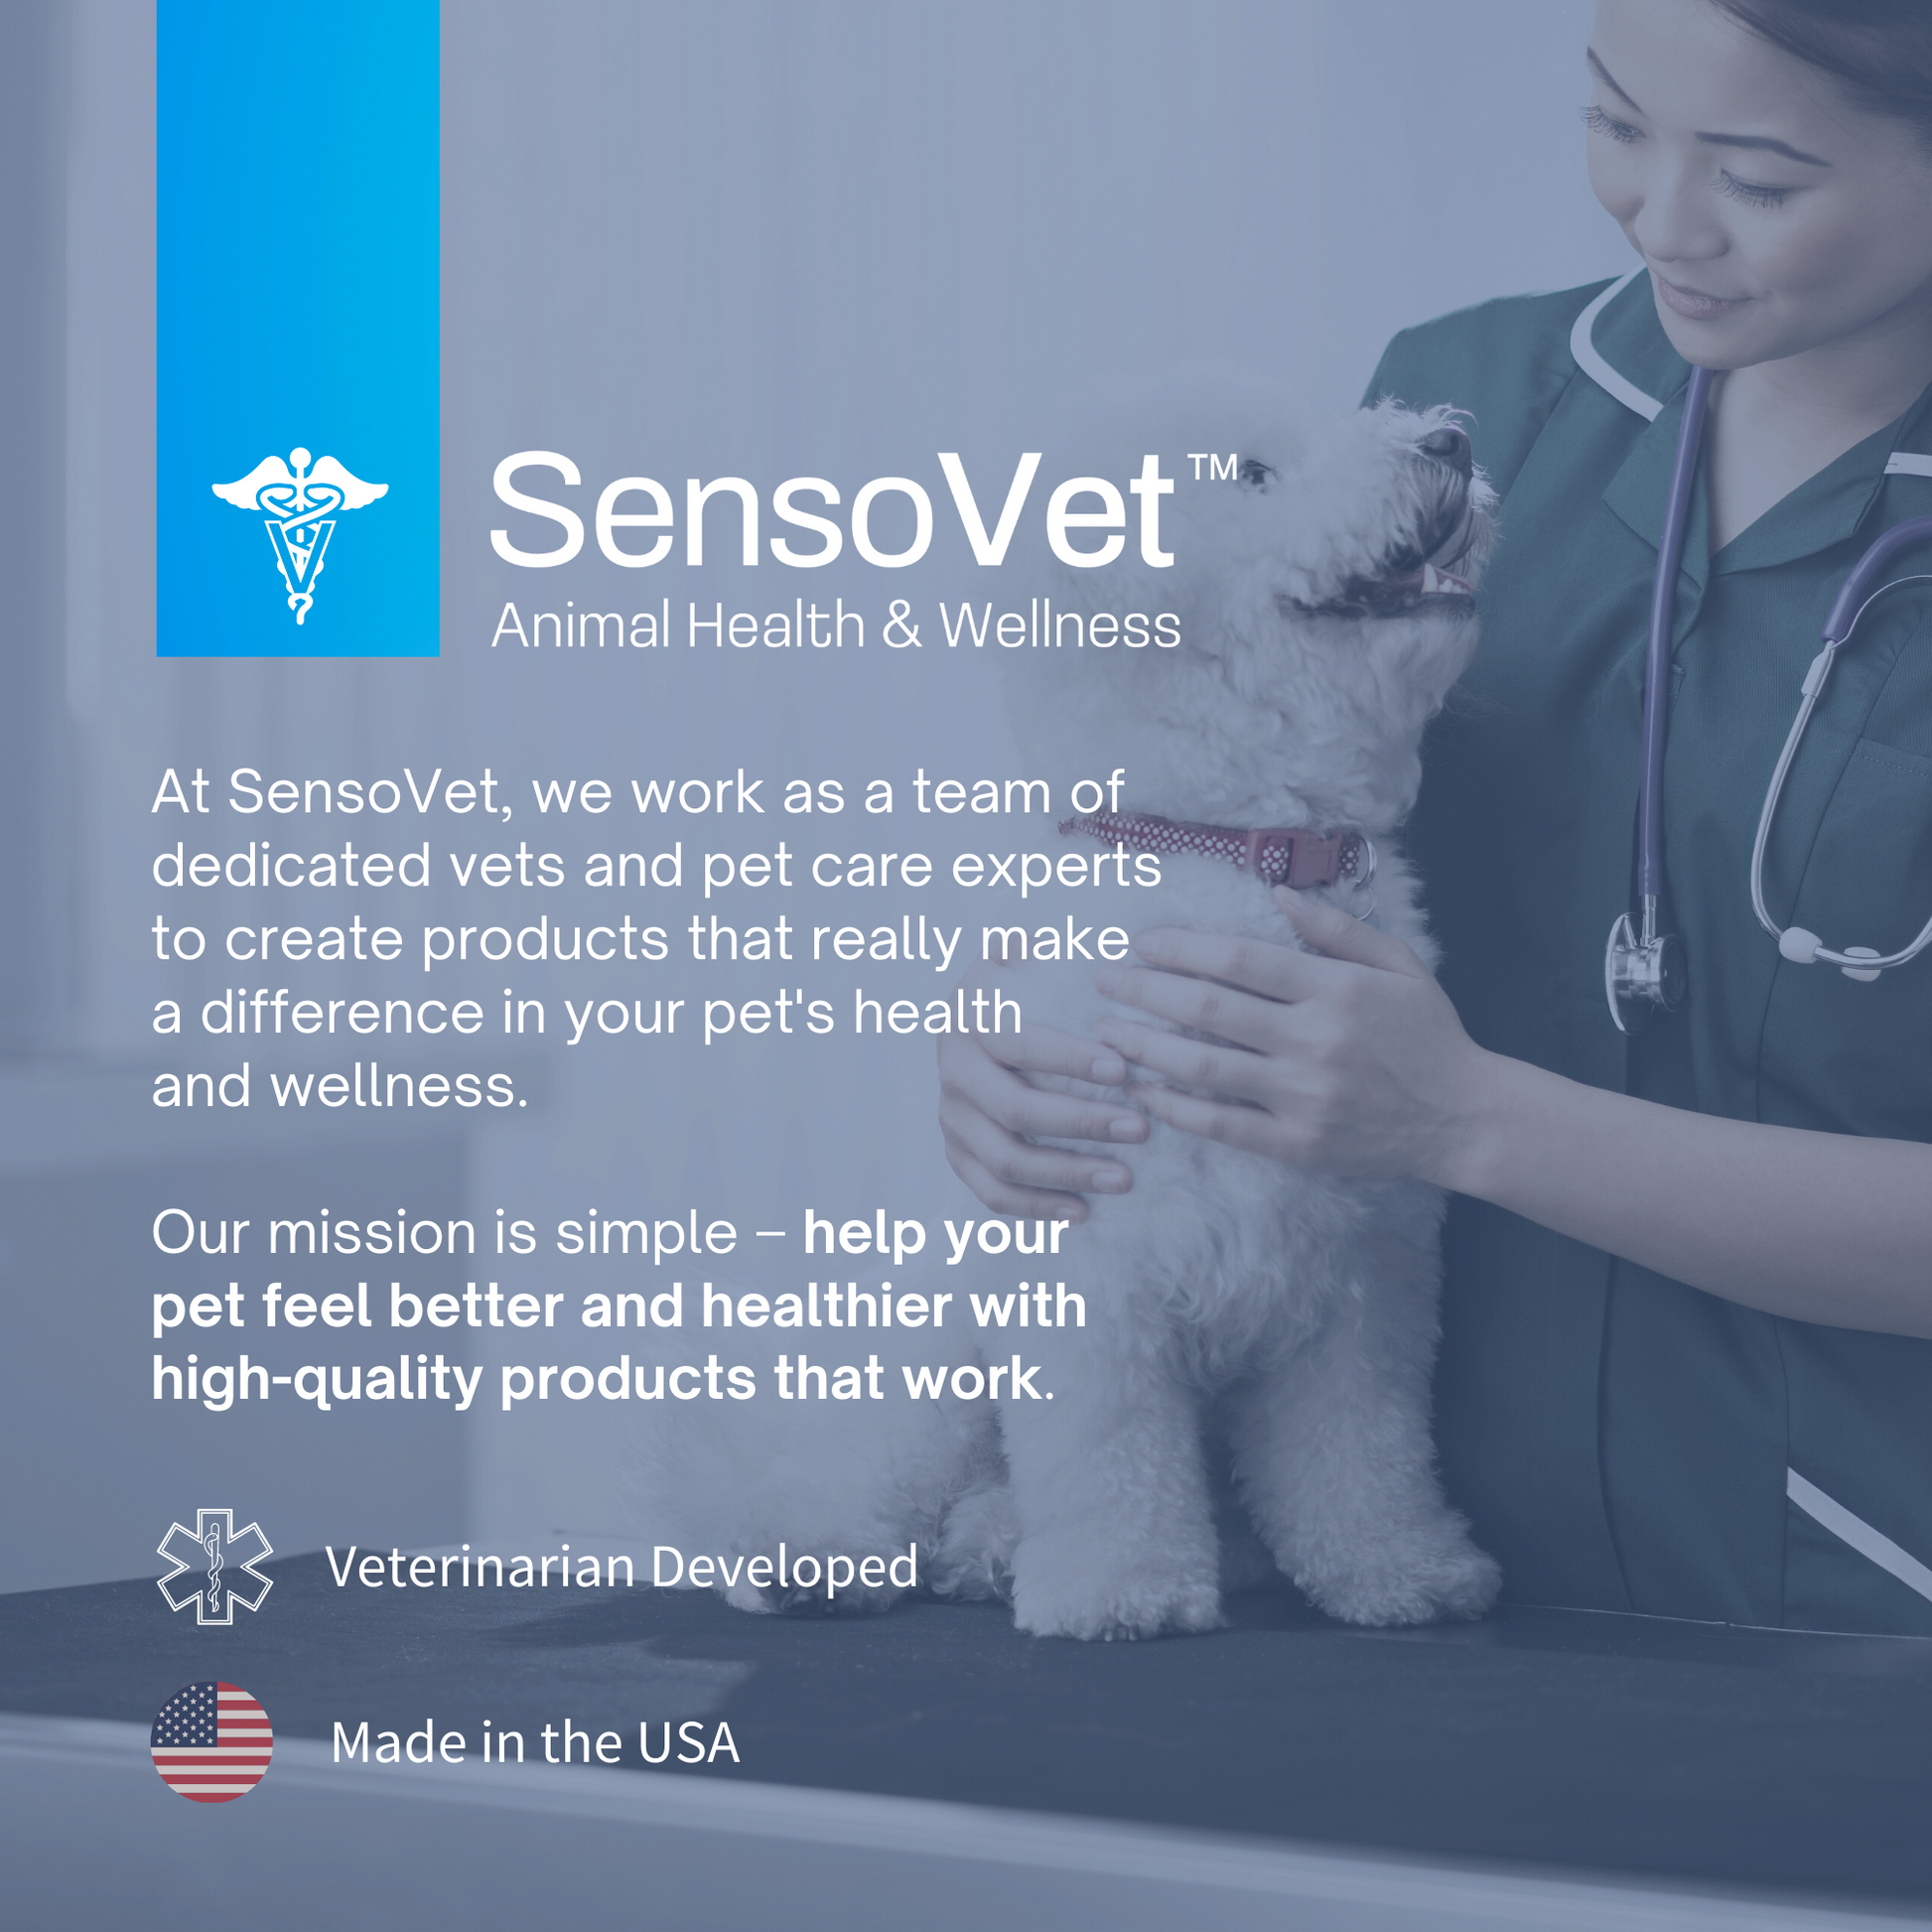 At SensoVet, we work as a team of dedicated vets and pet care experts to create products that really make a difference in your pet's health and wellness.